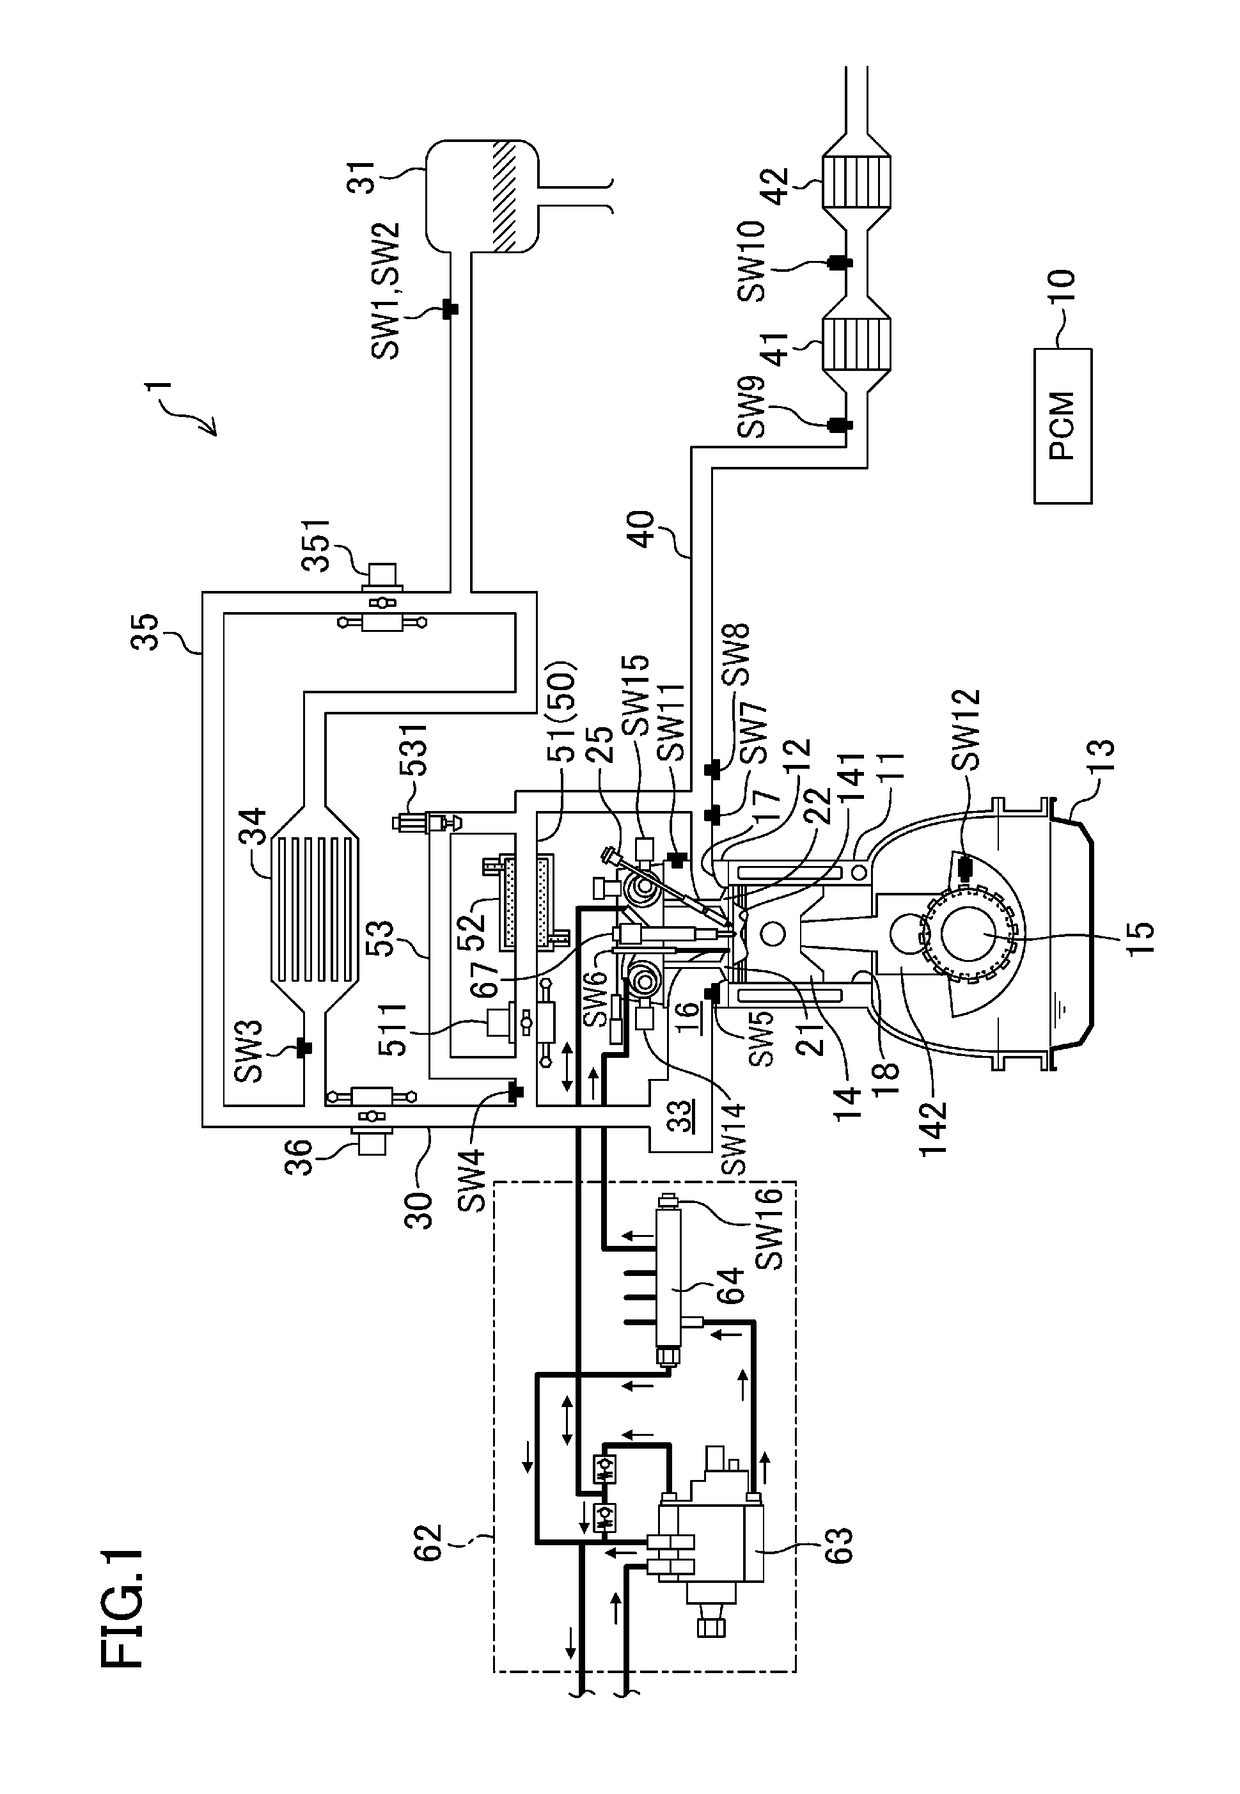 Spark-ignition direct-injection engine